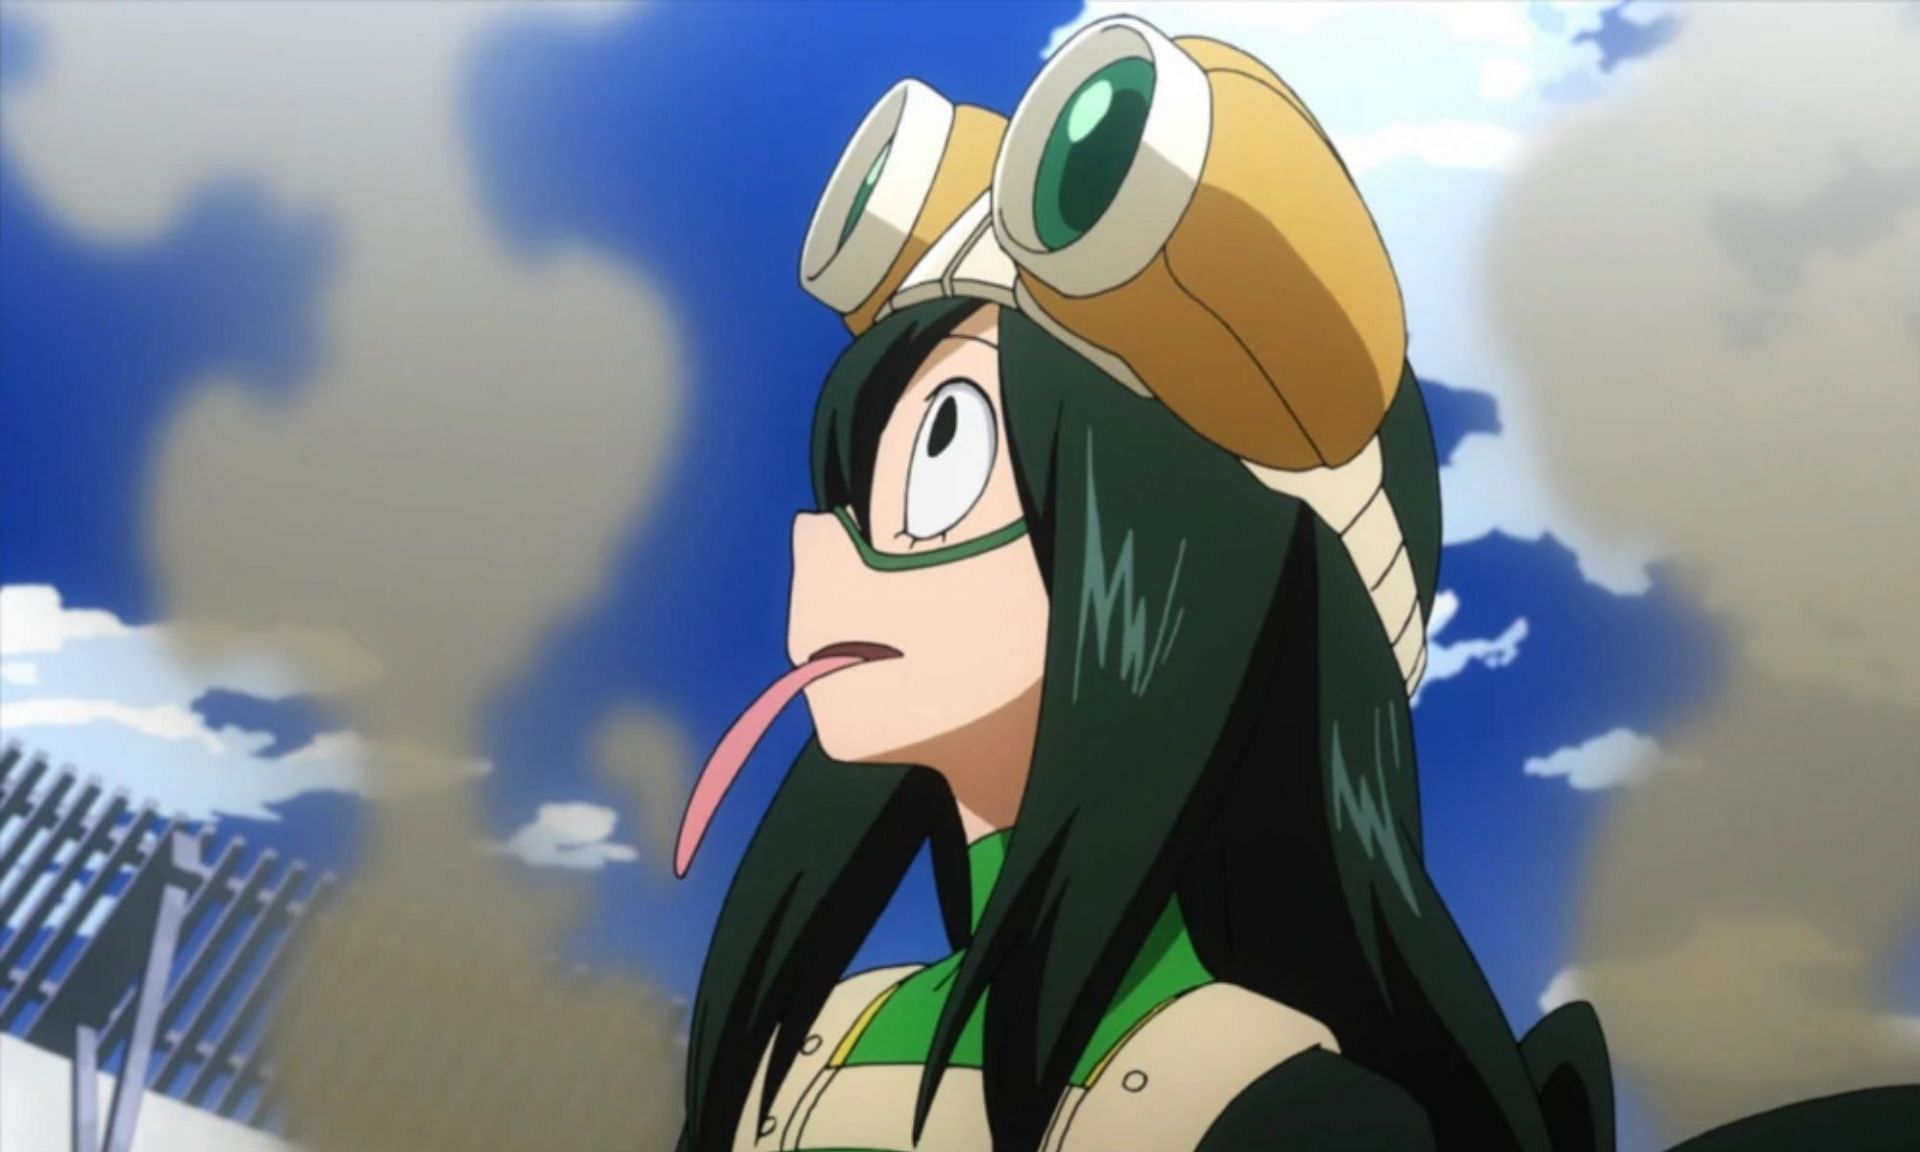 Tsuyu Asui is a very popular character in this series